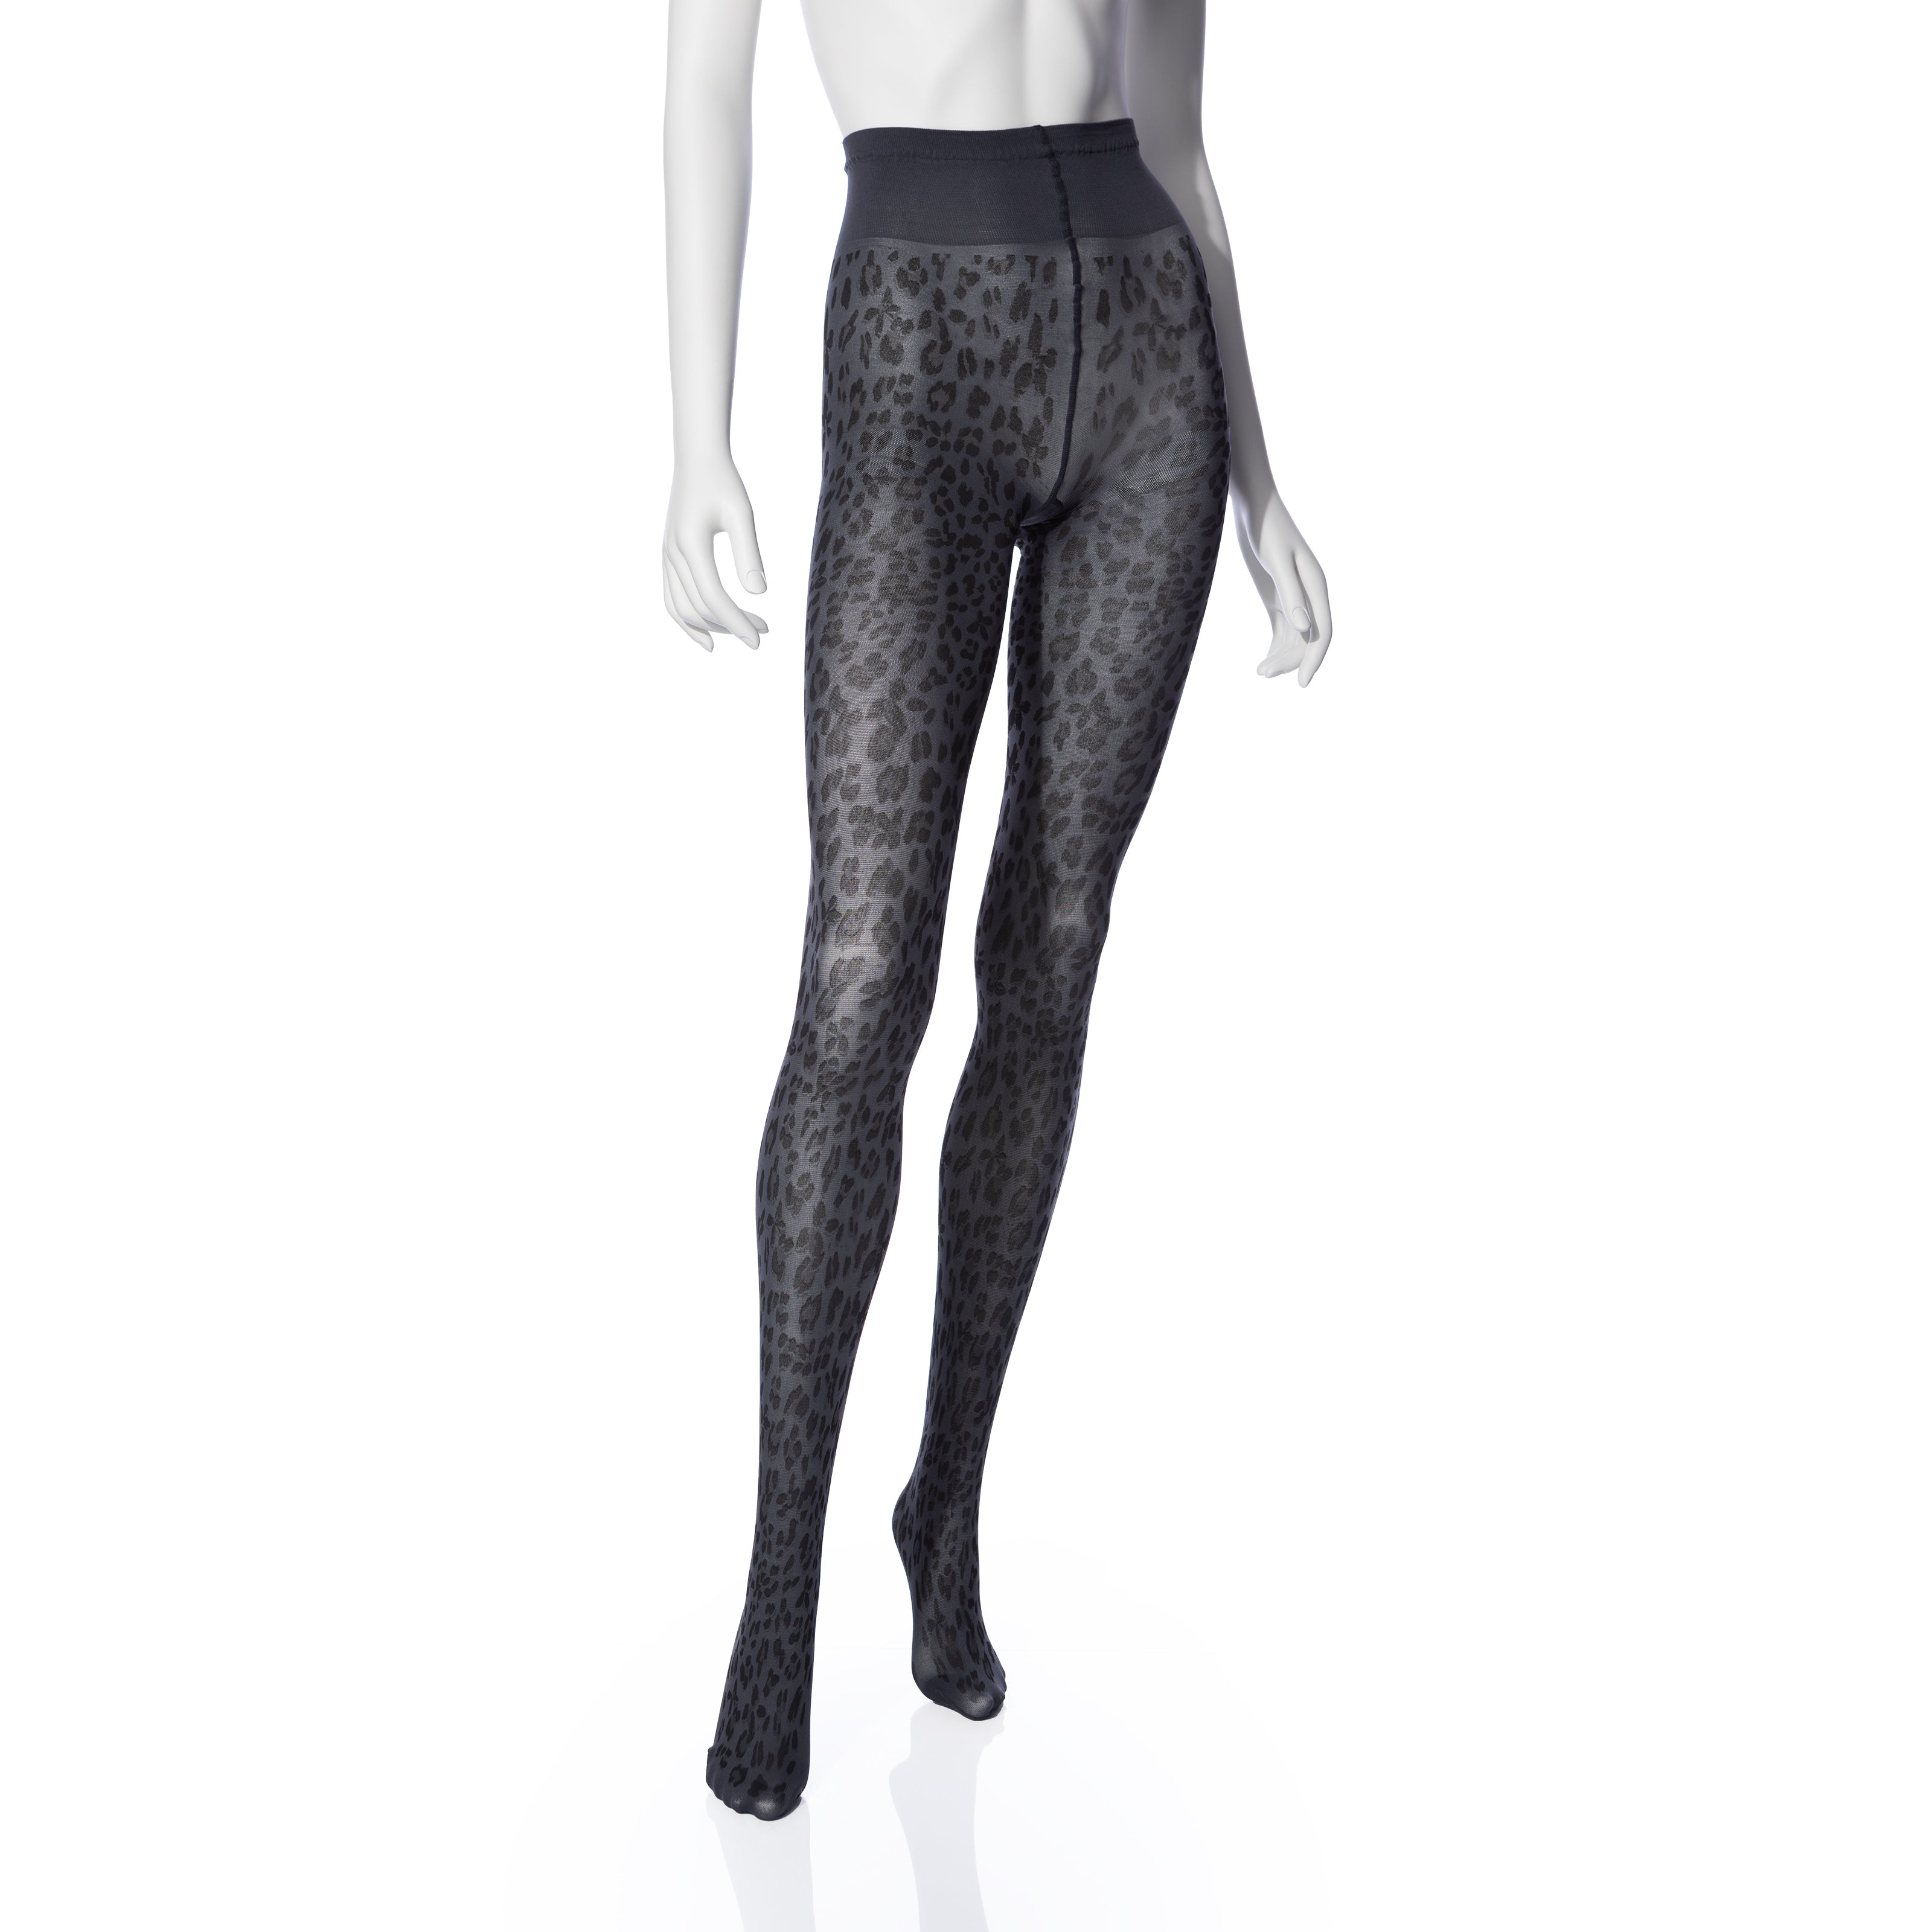 Roxanne Ethically Made Leopard Print Tights - Limited Edition